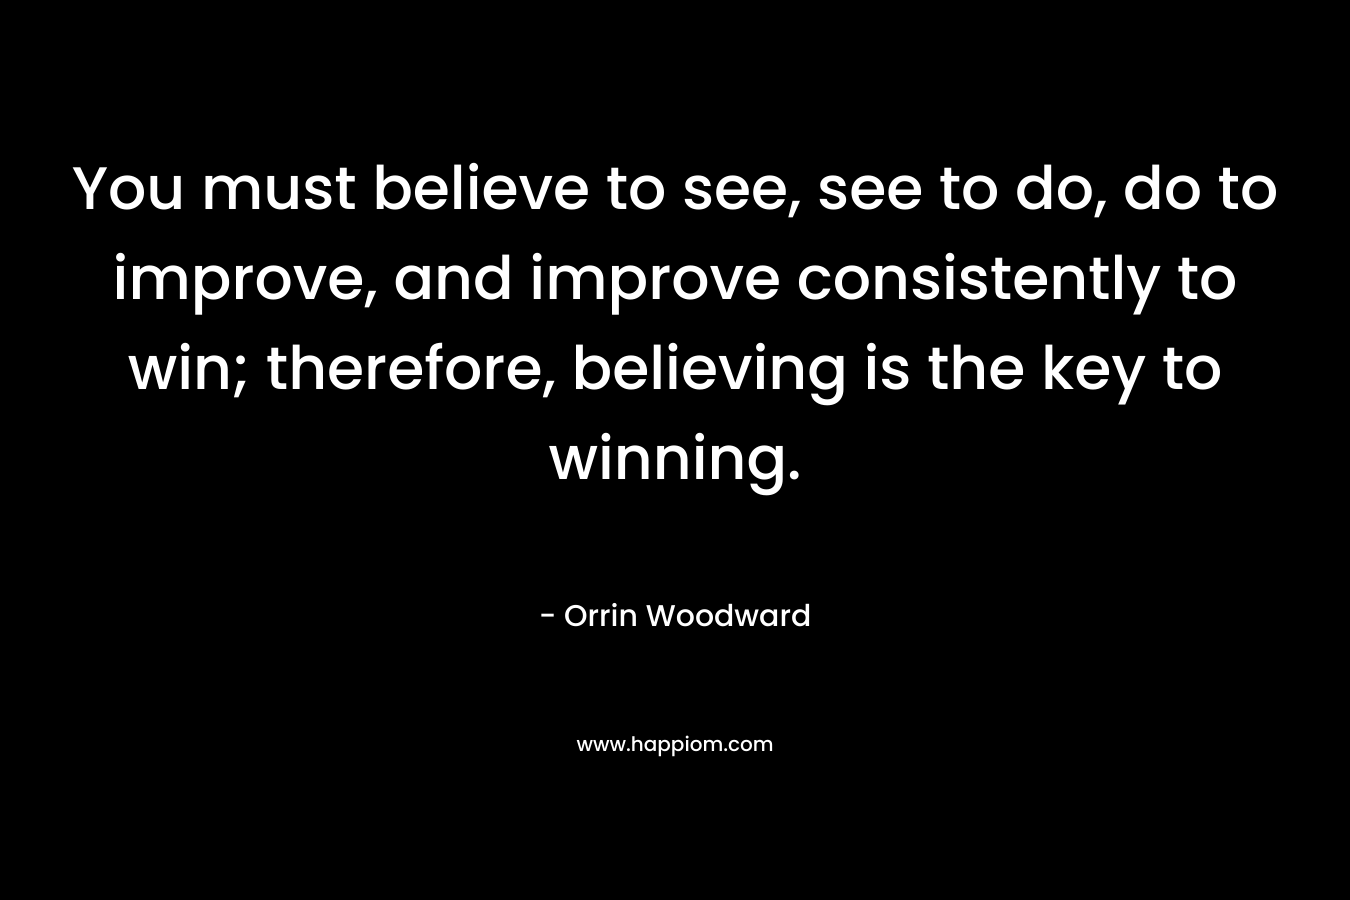 You must believe to see, see to do, do to improve, and improve consistently to win; therefore, believing is the key to winning.